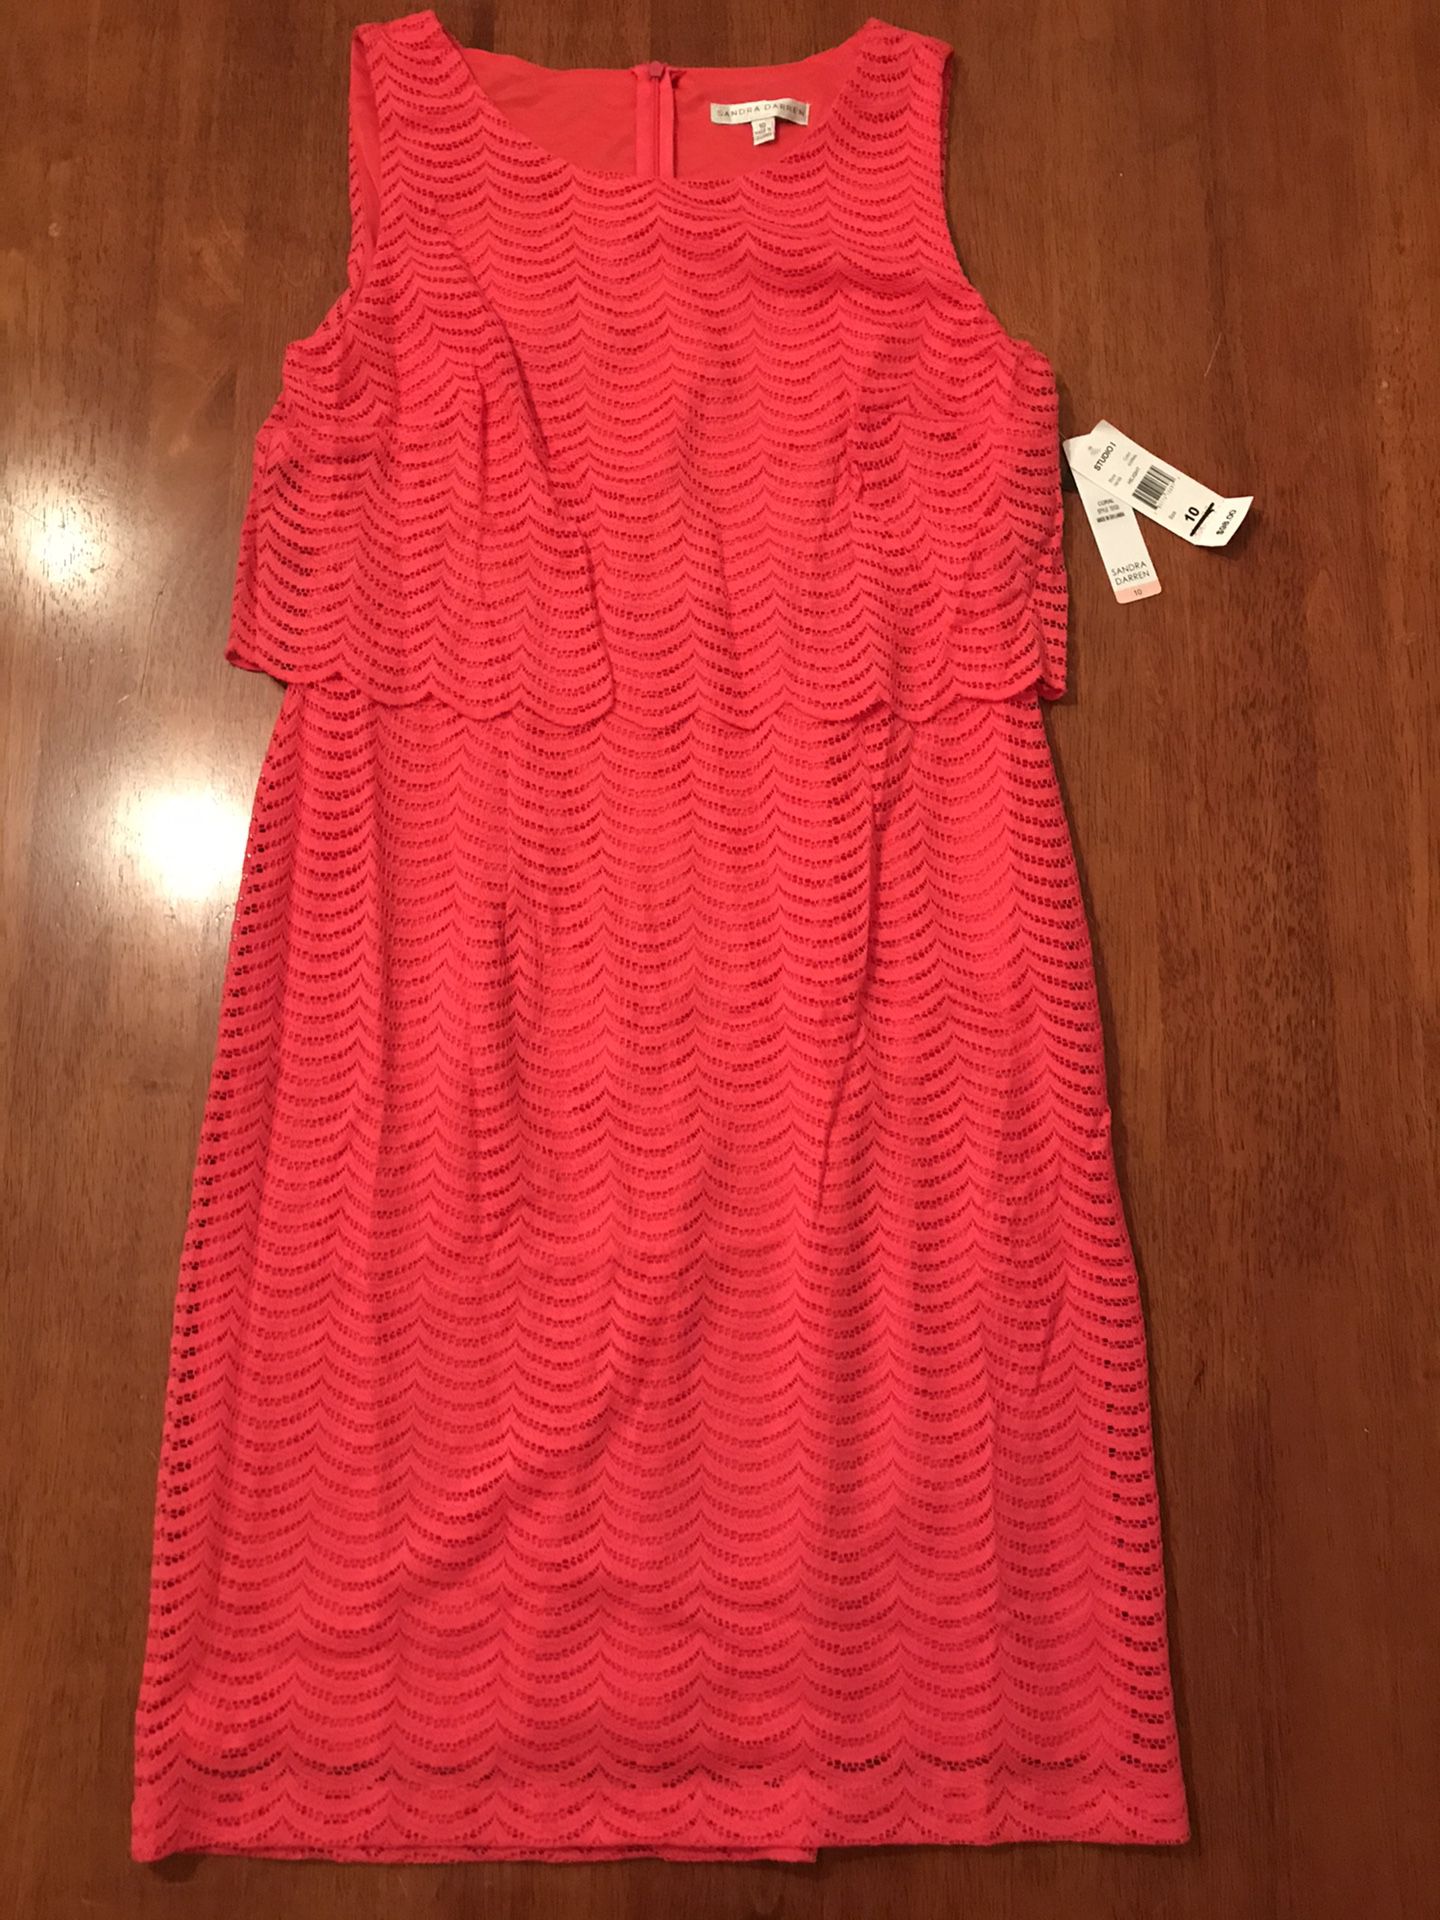 Hot Pink Lace Dress by Sandra Darren- Size 10- NEW WITH TAGS